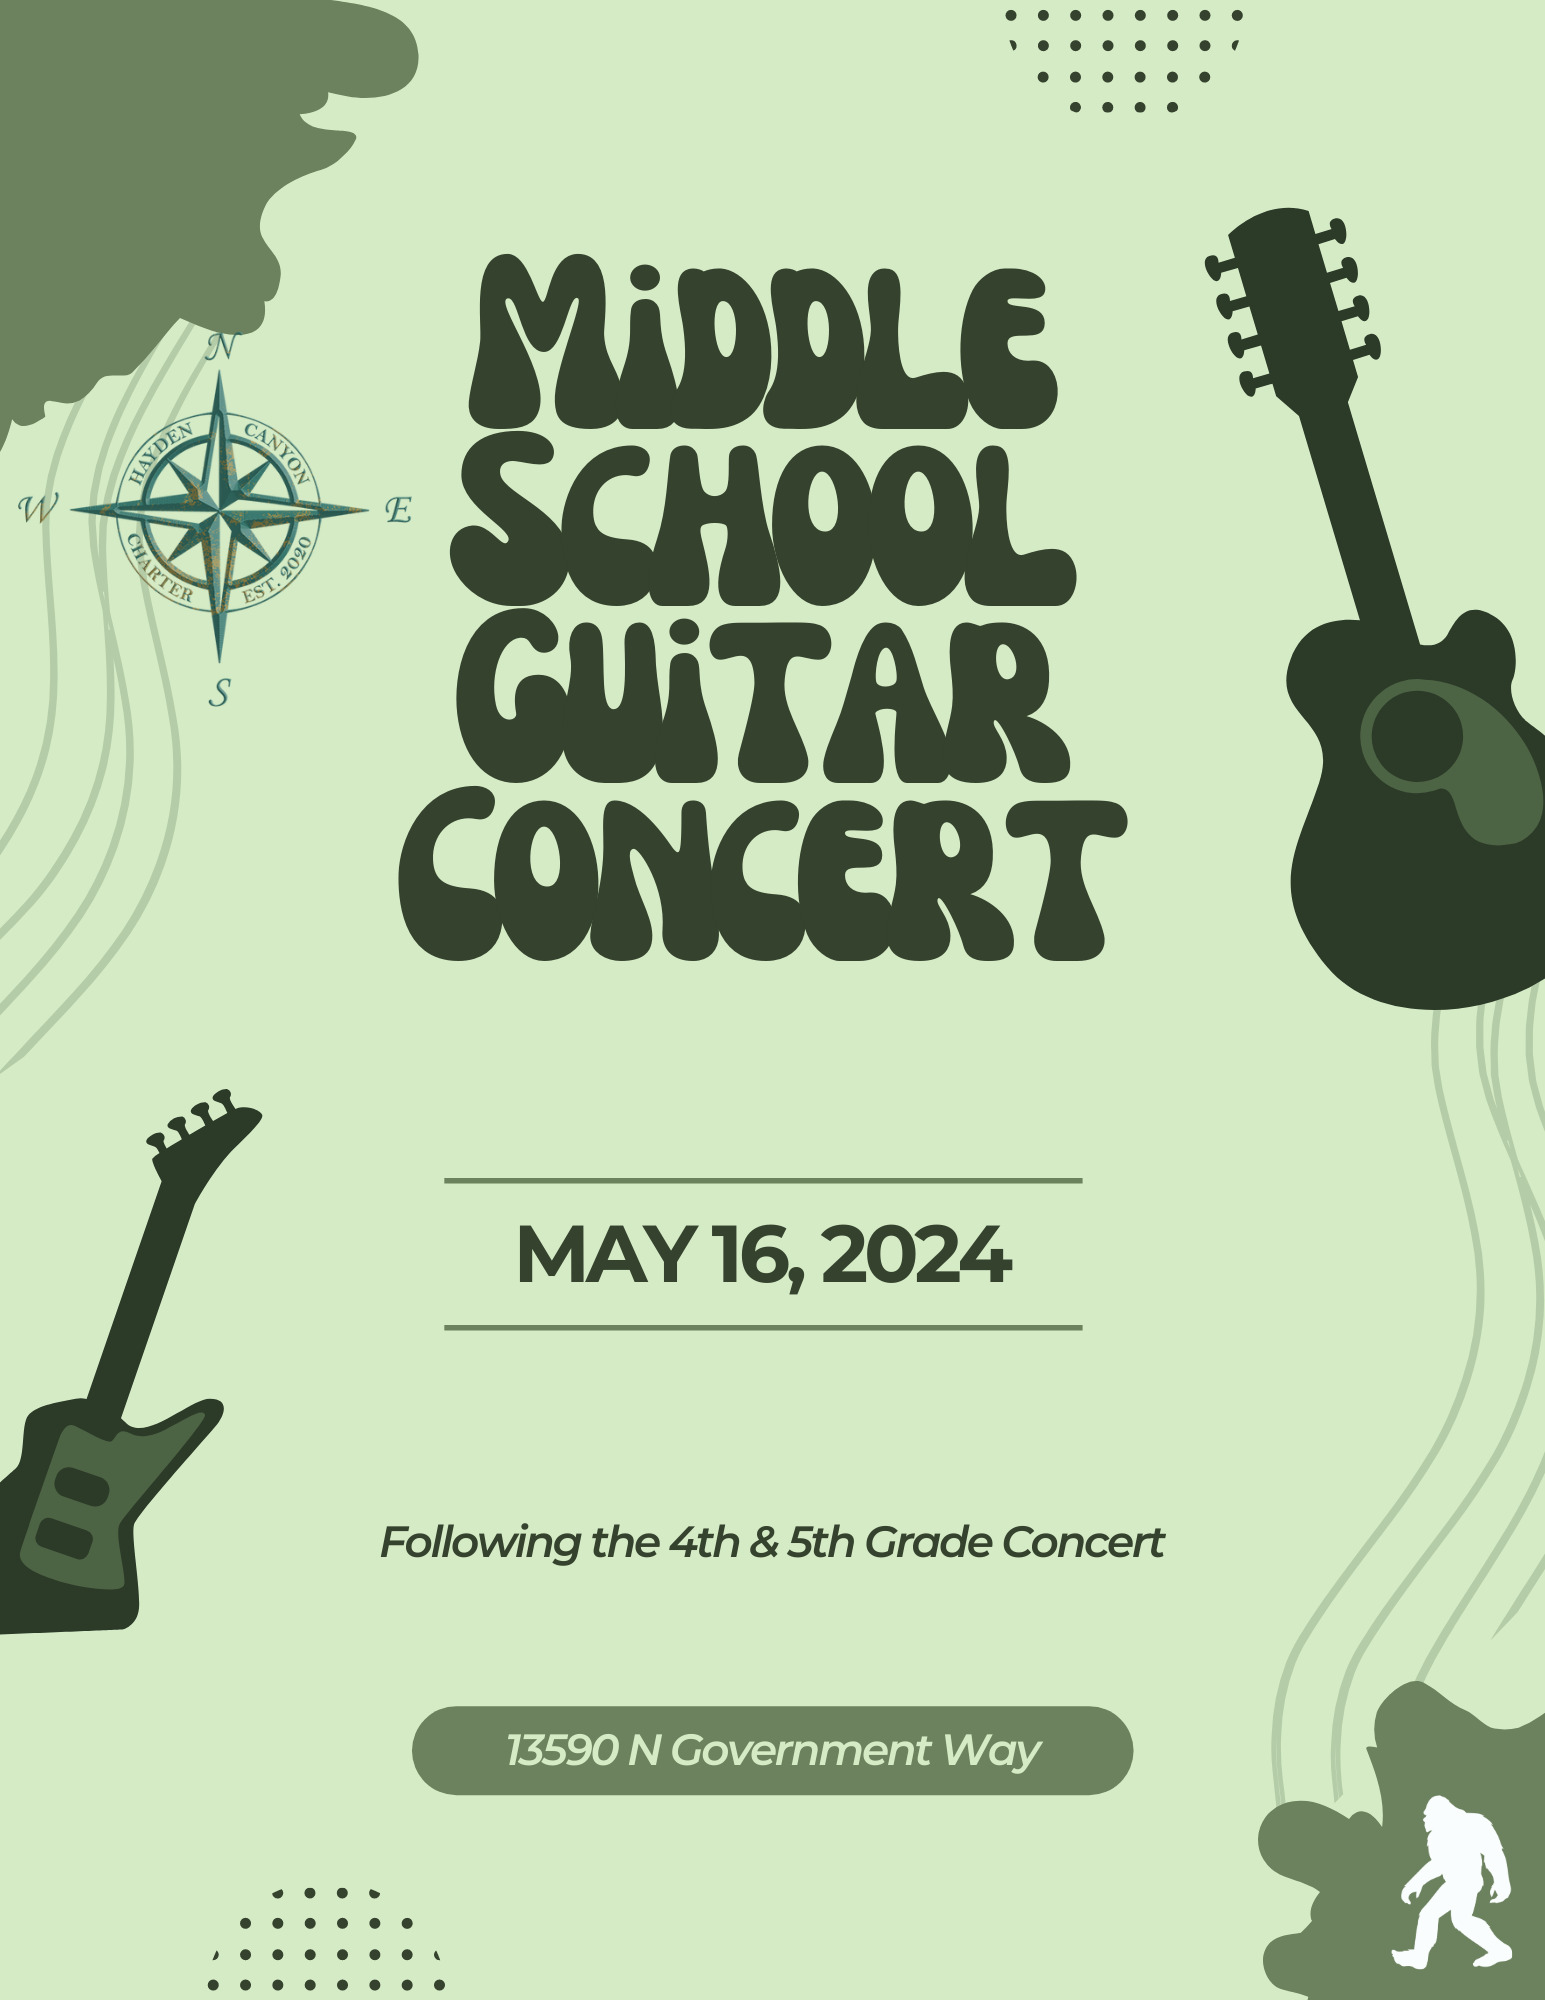 MS Guitar Concert | May 16, 2024 | Hayden Canyon Charter